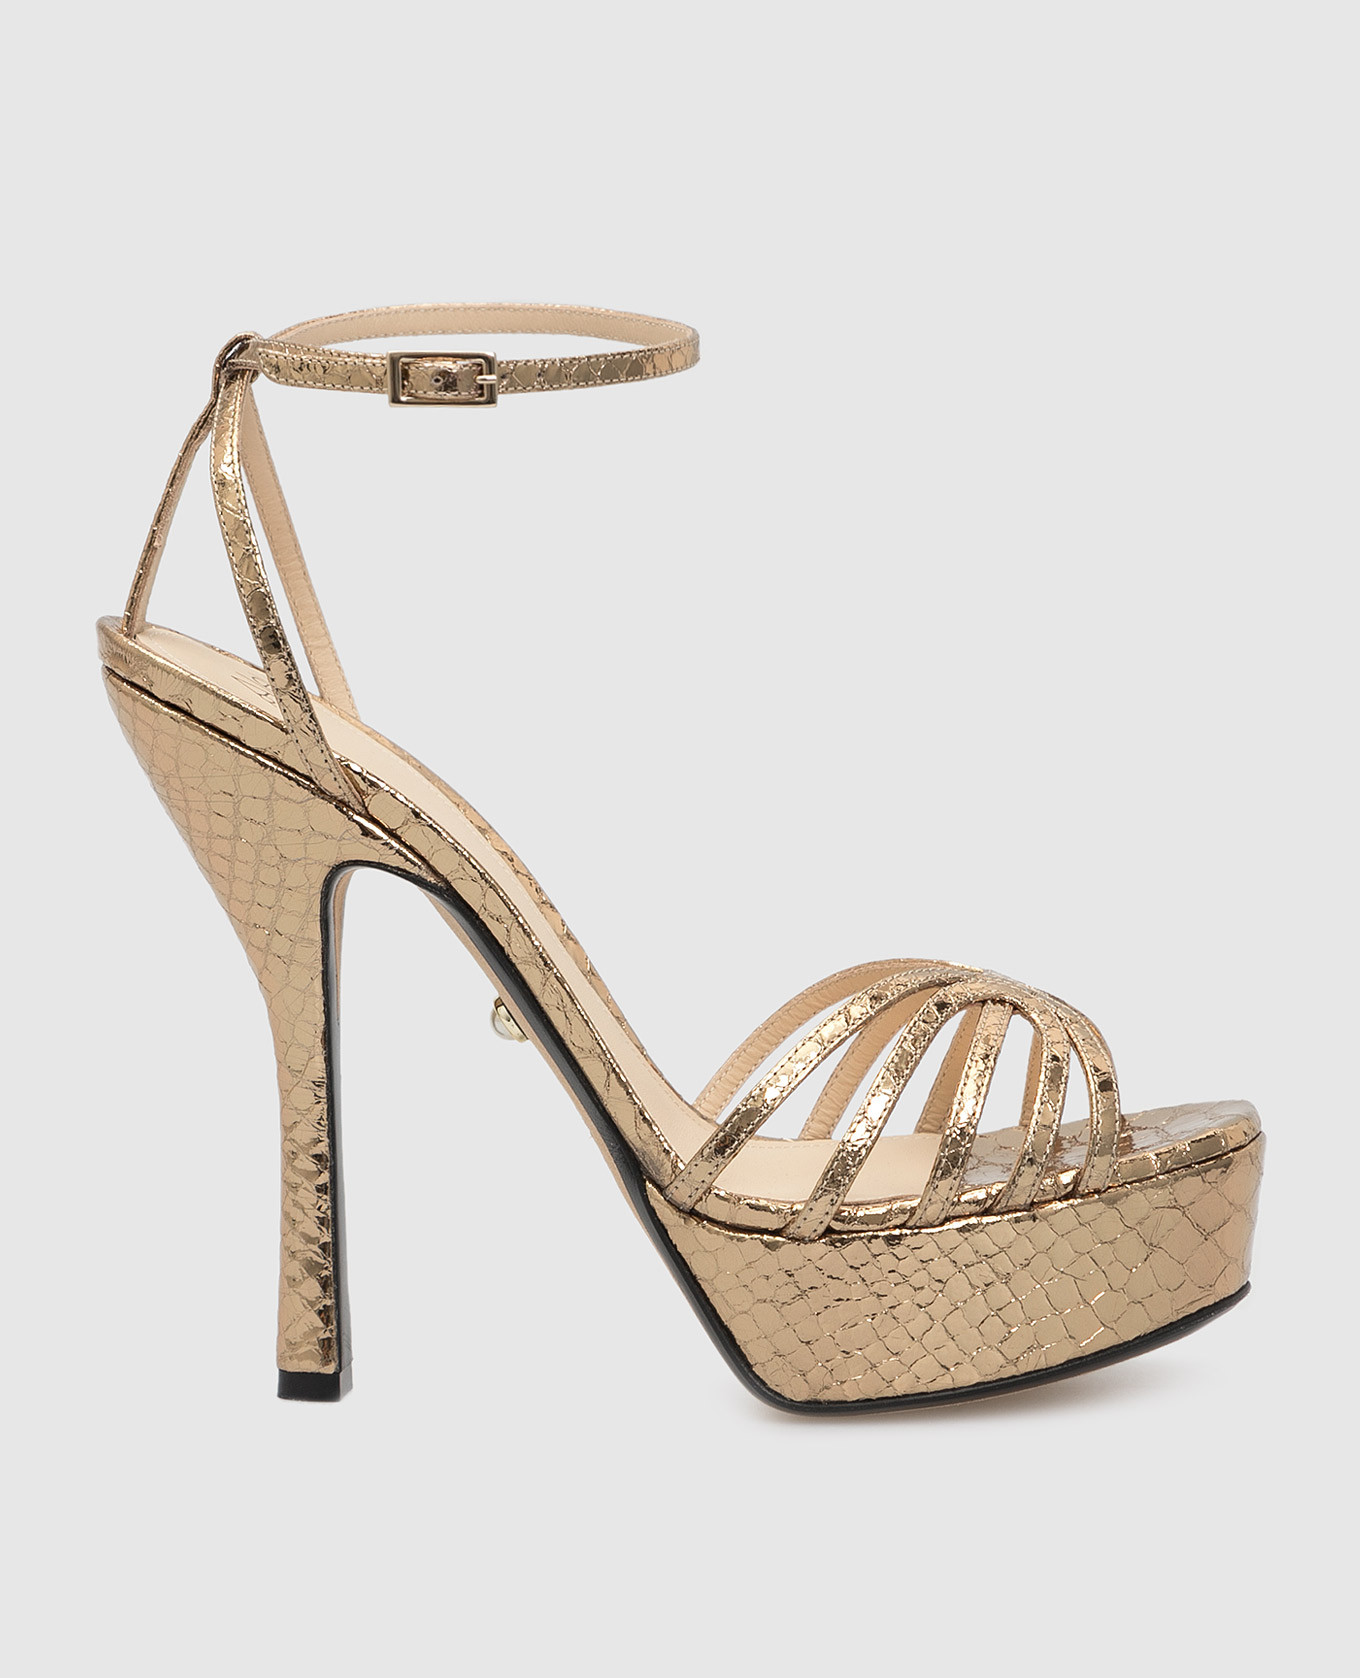 Gold-tone leather sandals